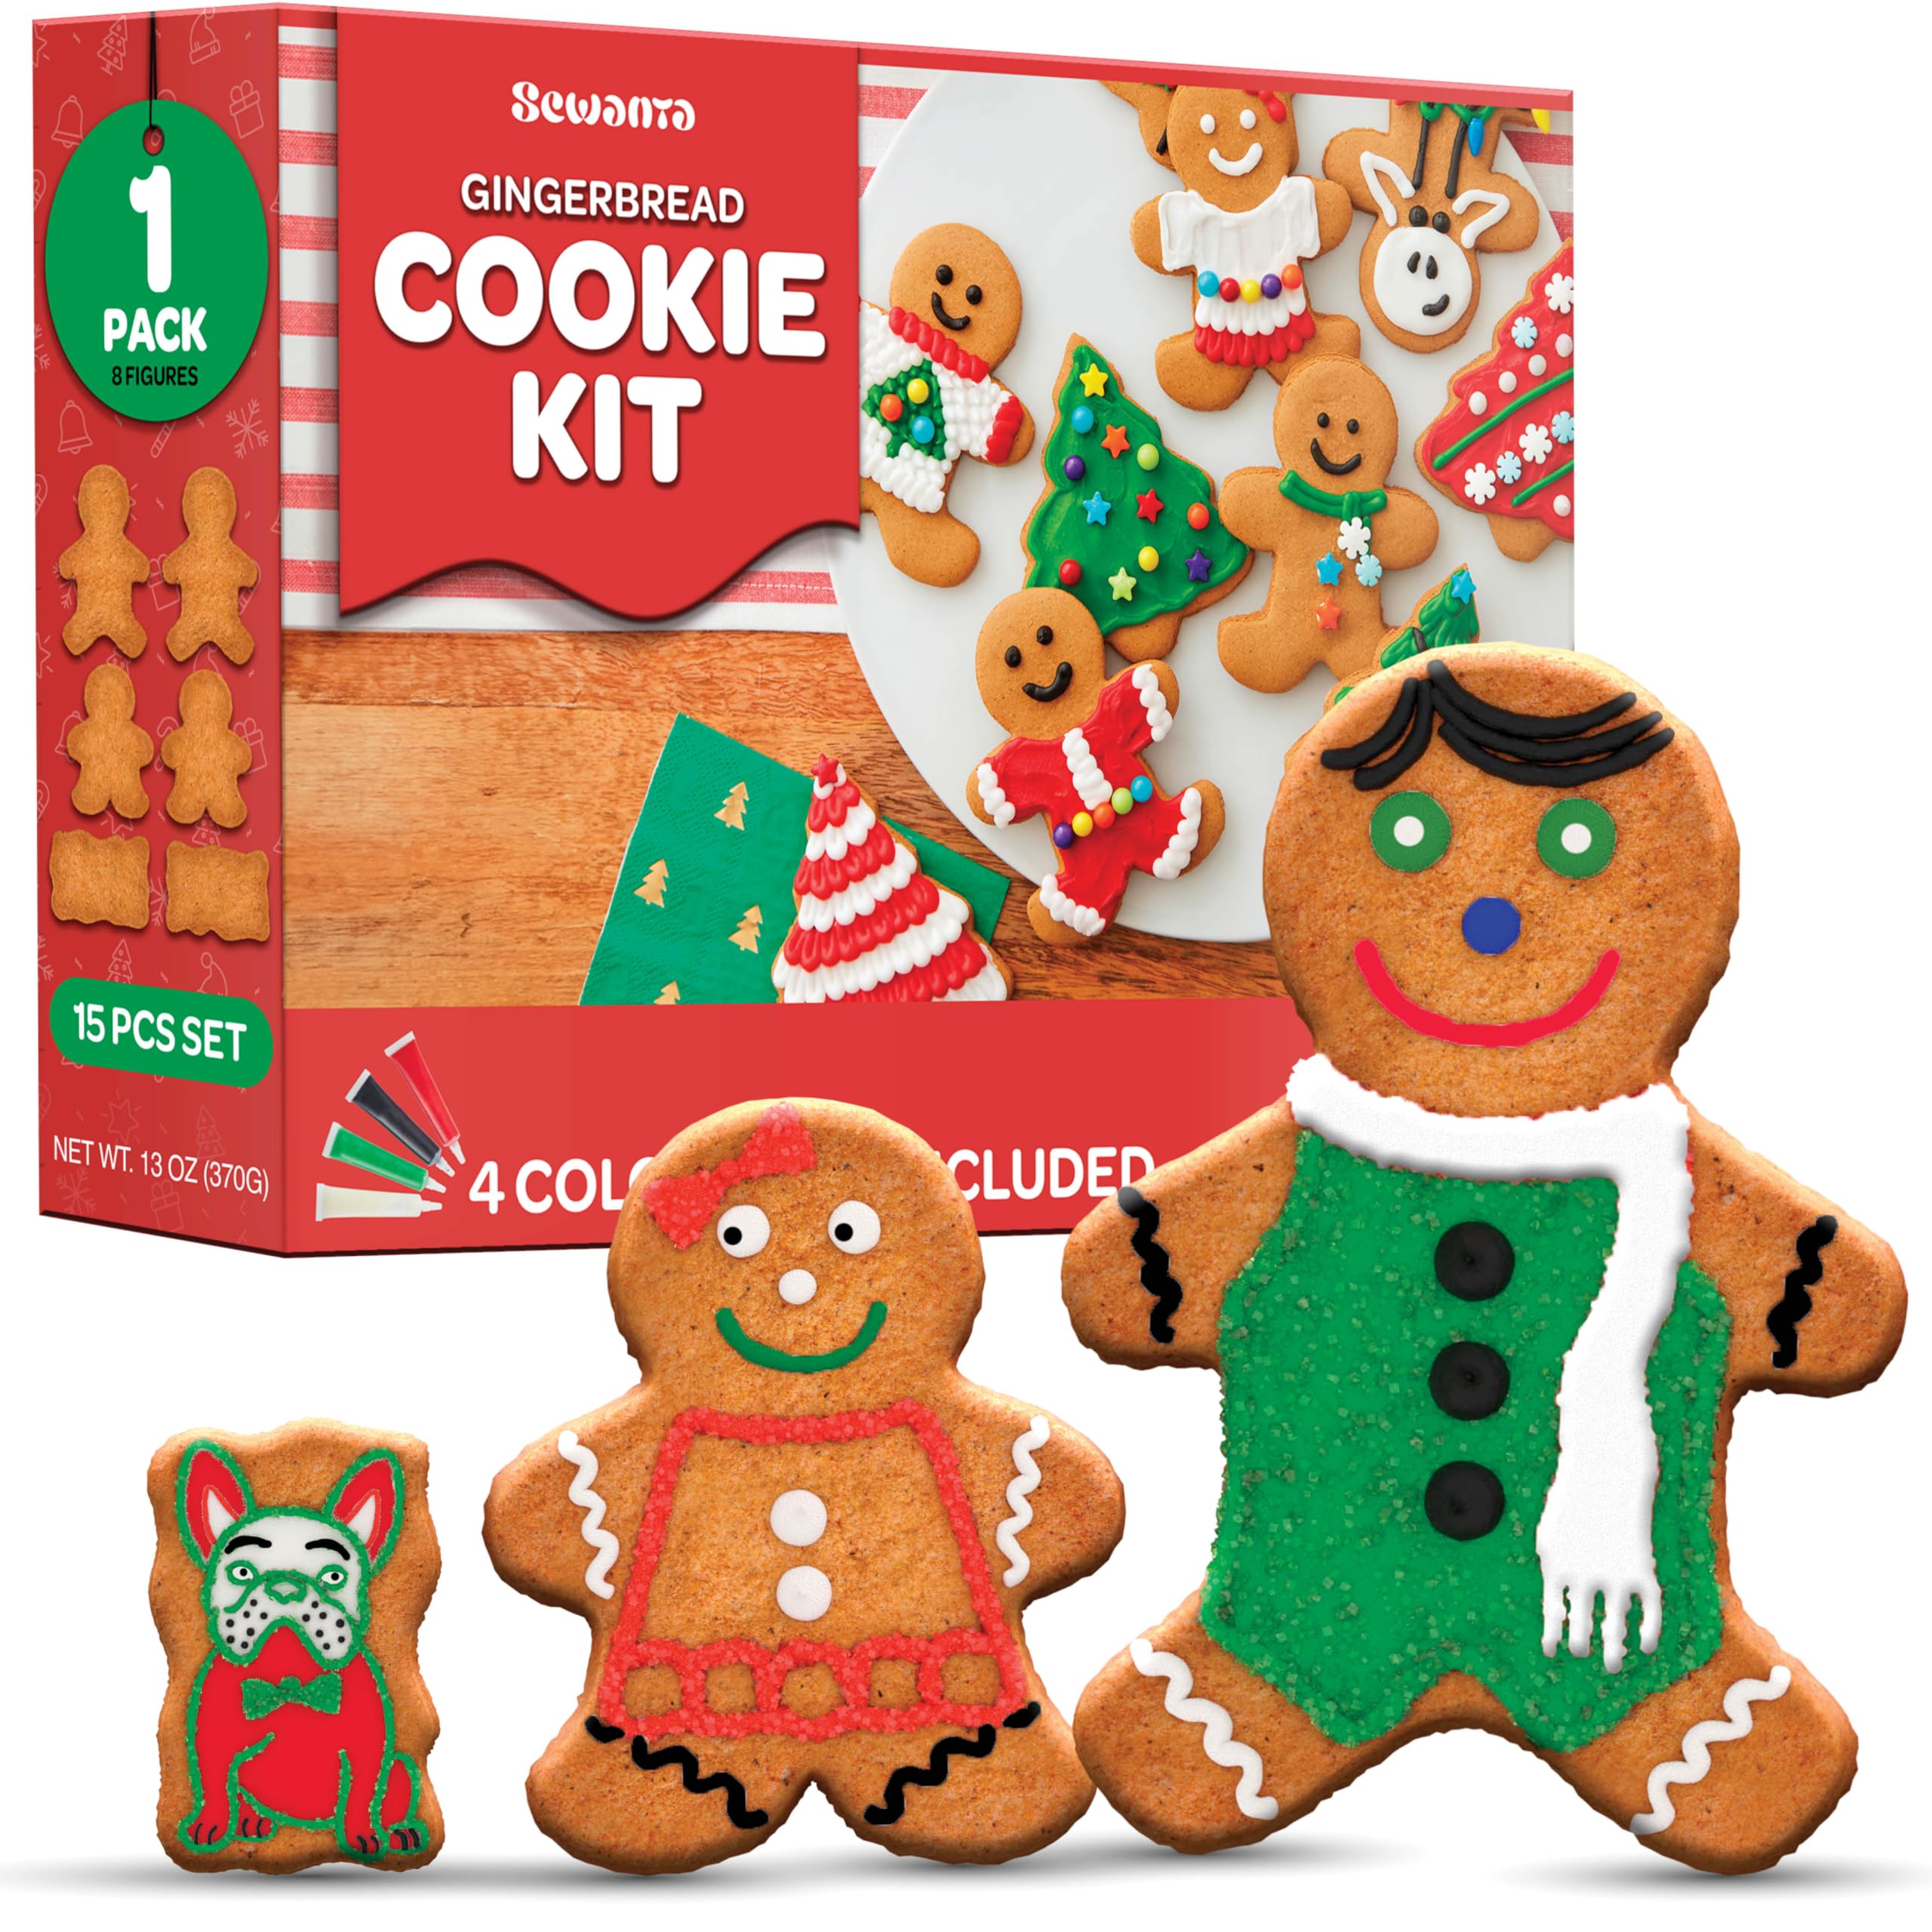 Gingerbread Man & tree Cookie Kit, Holiday Fun Baking Set - Includes: 12 Pre-Baked Cookies, Tons Of Candies, Green Fondant, 3 Colors Icing, Decorating Bags & Tip, Bundled With Fun Holiday Stickers  - Like New